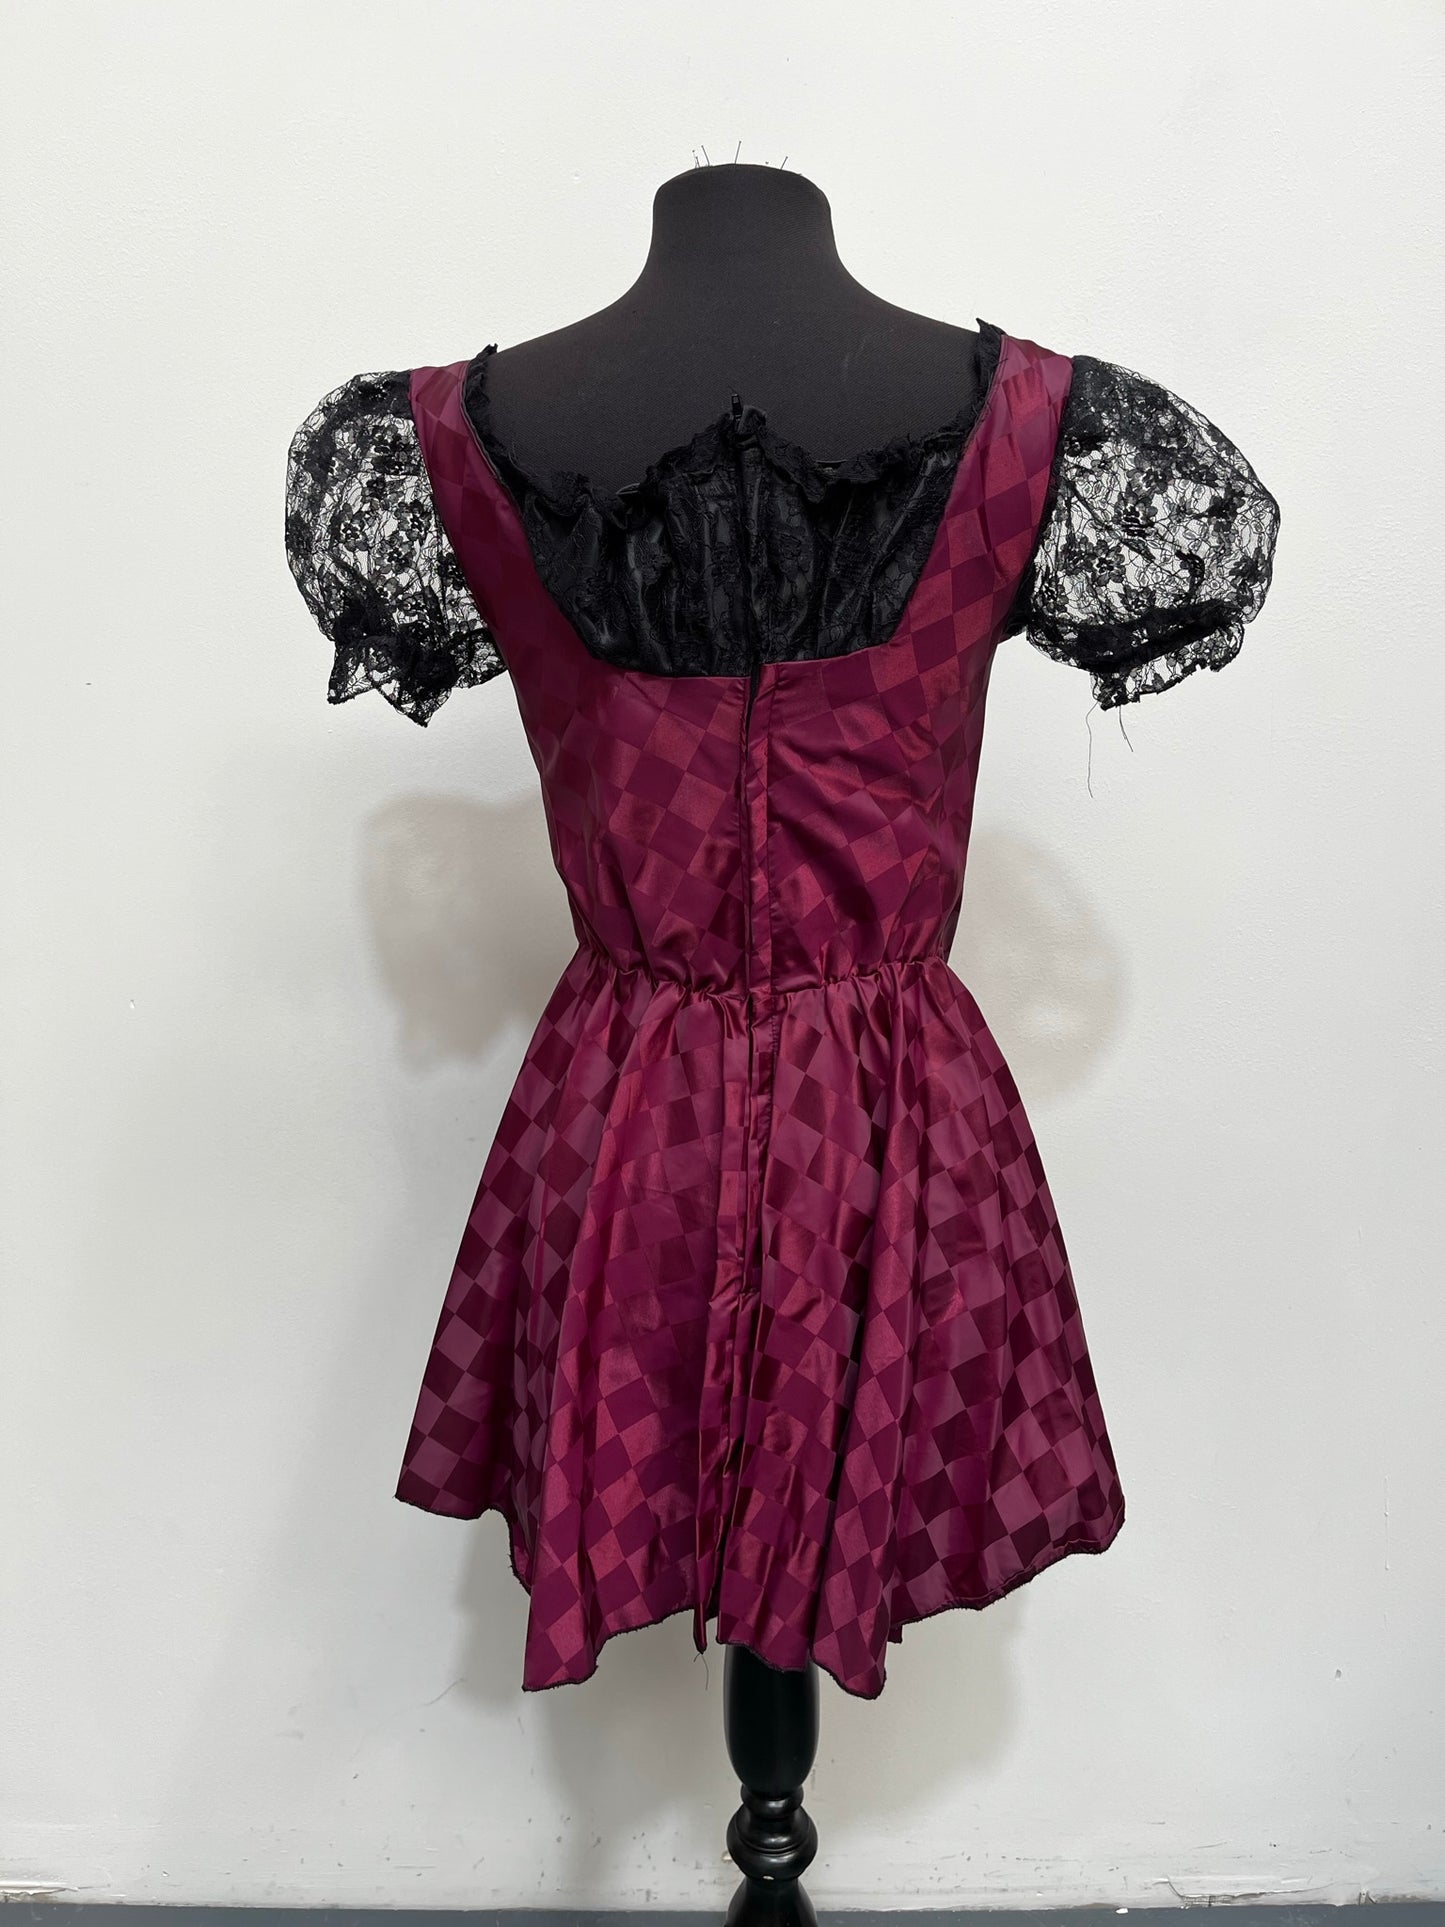 Rubies Burgundy Black Maid/Wench Outfit Size XS - Ex Hire